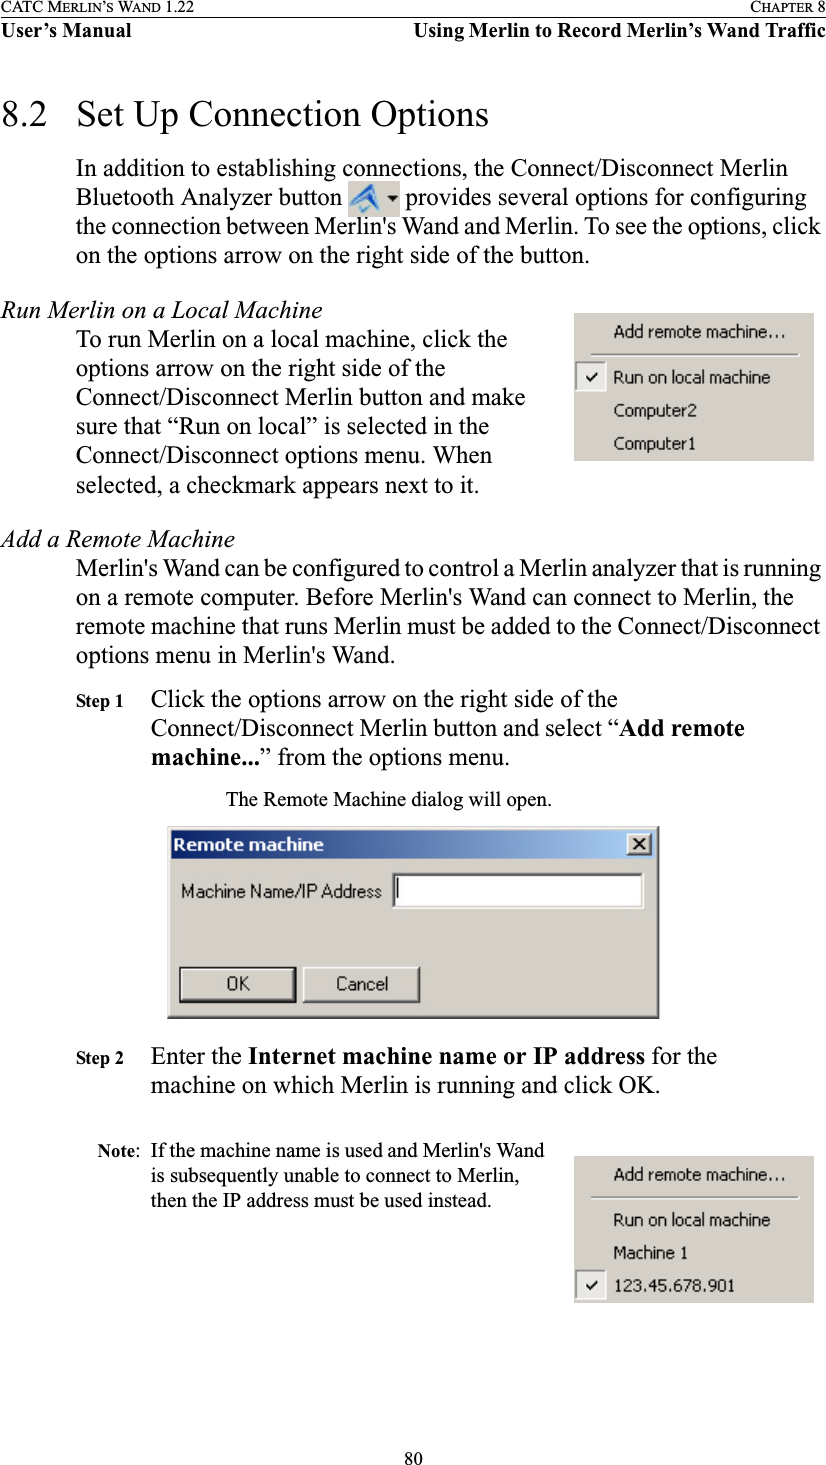 80CATC MERLIN’S WAND 1.22 CHAPTER 8User’s Manual Using Merlin to Record Merlin’s Wand Traffic8.2 Set Up Connection OptionsIn addition to establishing connections, the Connect/Disconnect Merlin Bluetooth Analyzer button   provides several options for configuring the connection between Merlin&apos;s Wand and Merlin. To see the options, click on the options arrow on the right side of the button.Run Merlin on a Local MachineTo run Merlin on a local machine, click the options arrow on the right side of the Connect/Disconnect Merlin button and make sure that “Run on local” is selected in the Connect/Disconnect options menu. When selected, a checkmark appears next to it.Add a Remote MachineMerlin&apos;s Wand can be configured to control a Merlin analyzer that is running on a remote computer. Before Merlin&apos;s Wand can connect to Merlin, the remote machine that runs Merlin must be added to the Connect/Disconnect options menu in Merlin&apos;s Wand.Step 1 Click the options arrow on the right side of the Connect/Disconnect Merlin button and select “Add remote machine...” from the options menu.The Remote Machine dialog will open.Step 2 Enter the Internet machine name or IP address for the machine on which Merlin is running and click OK.Note: If the machine name is used and Merlin&apos;s Wand is subsequently unable to connect to Merlin, then the IP address must be used instead.